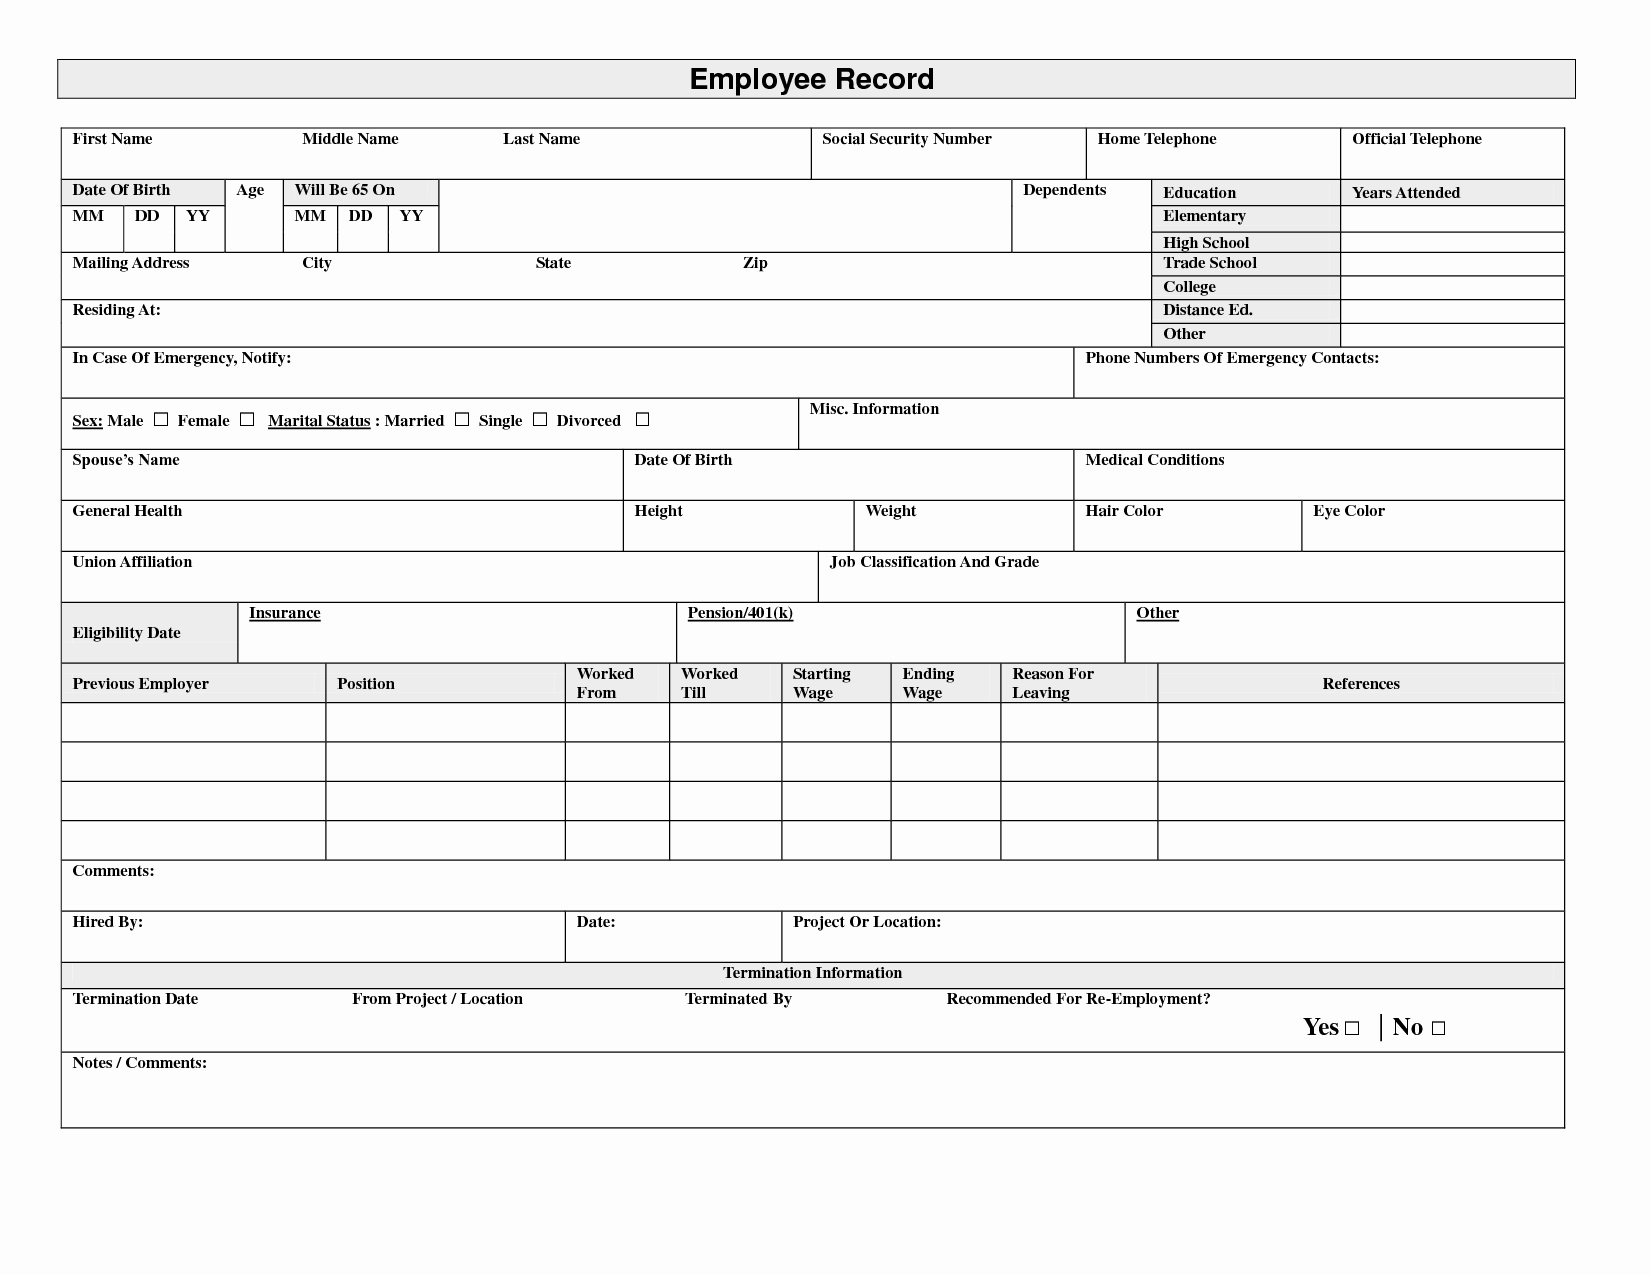 Employment Information form Template Inspirational Employee Record form Doc Business